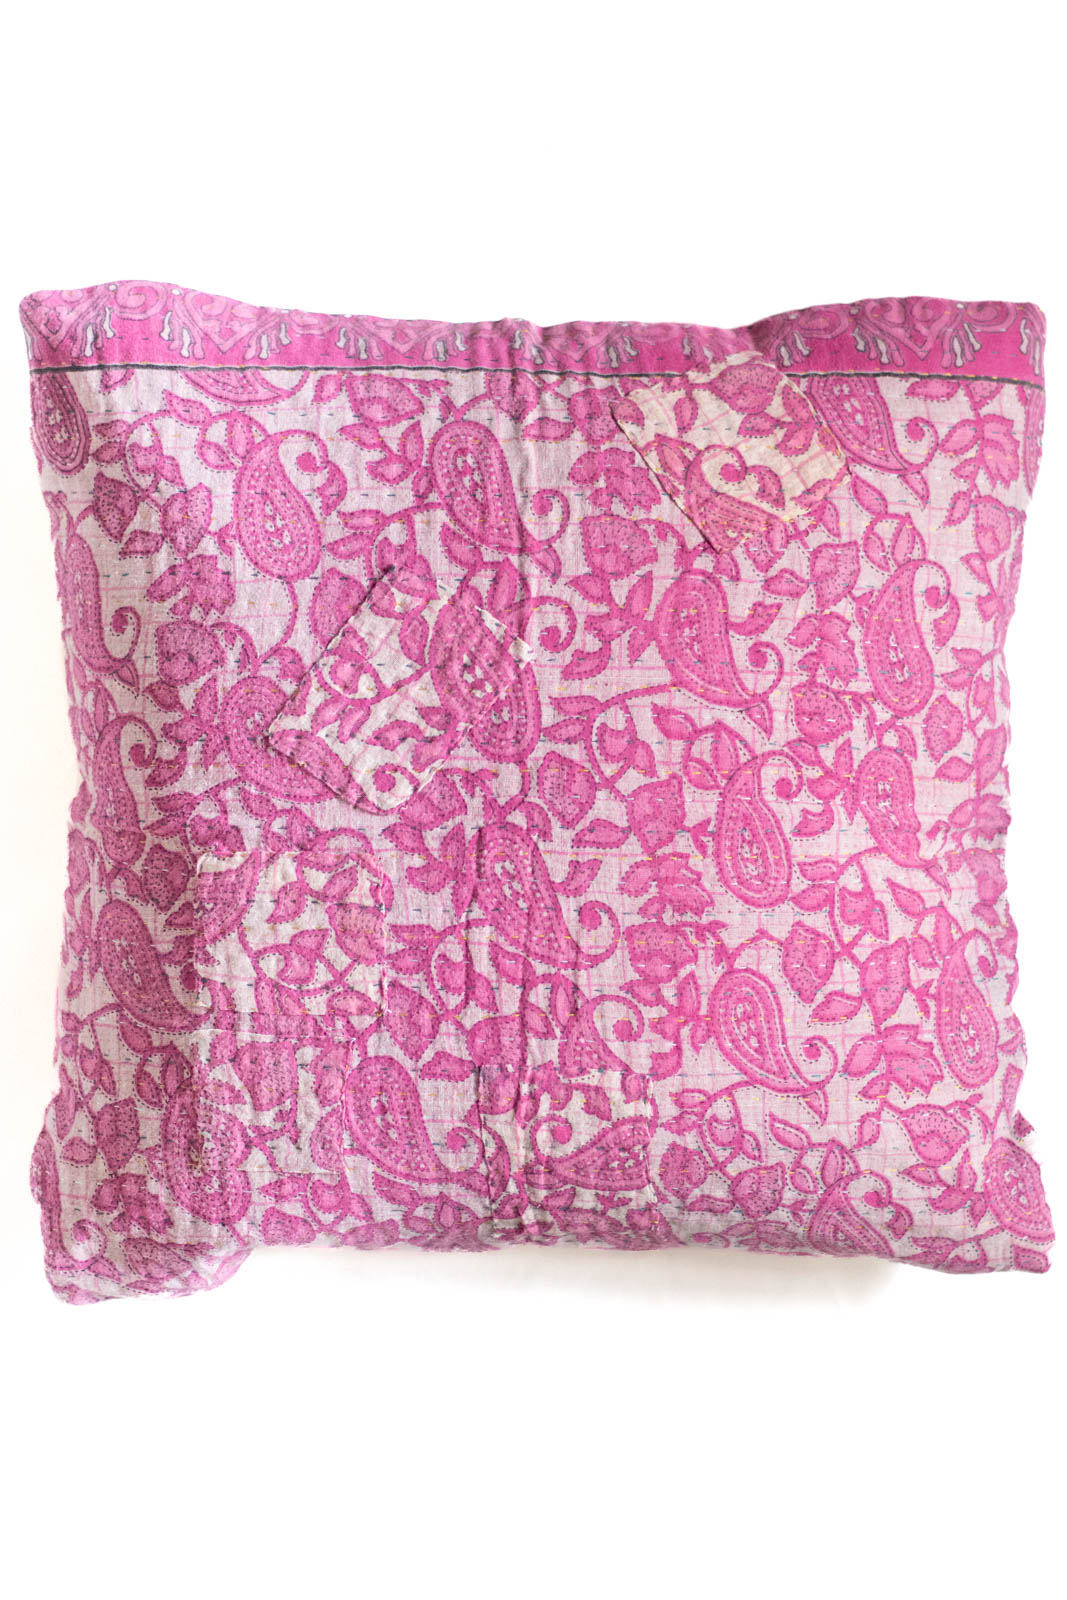 Worth no. 1 Kantha Pillow Cover